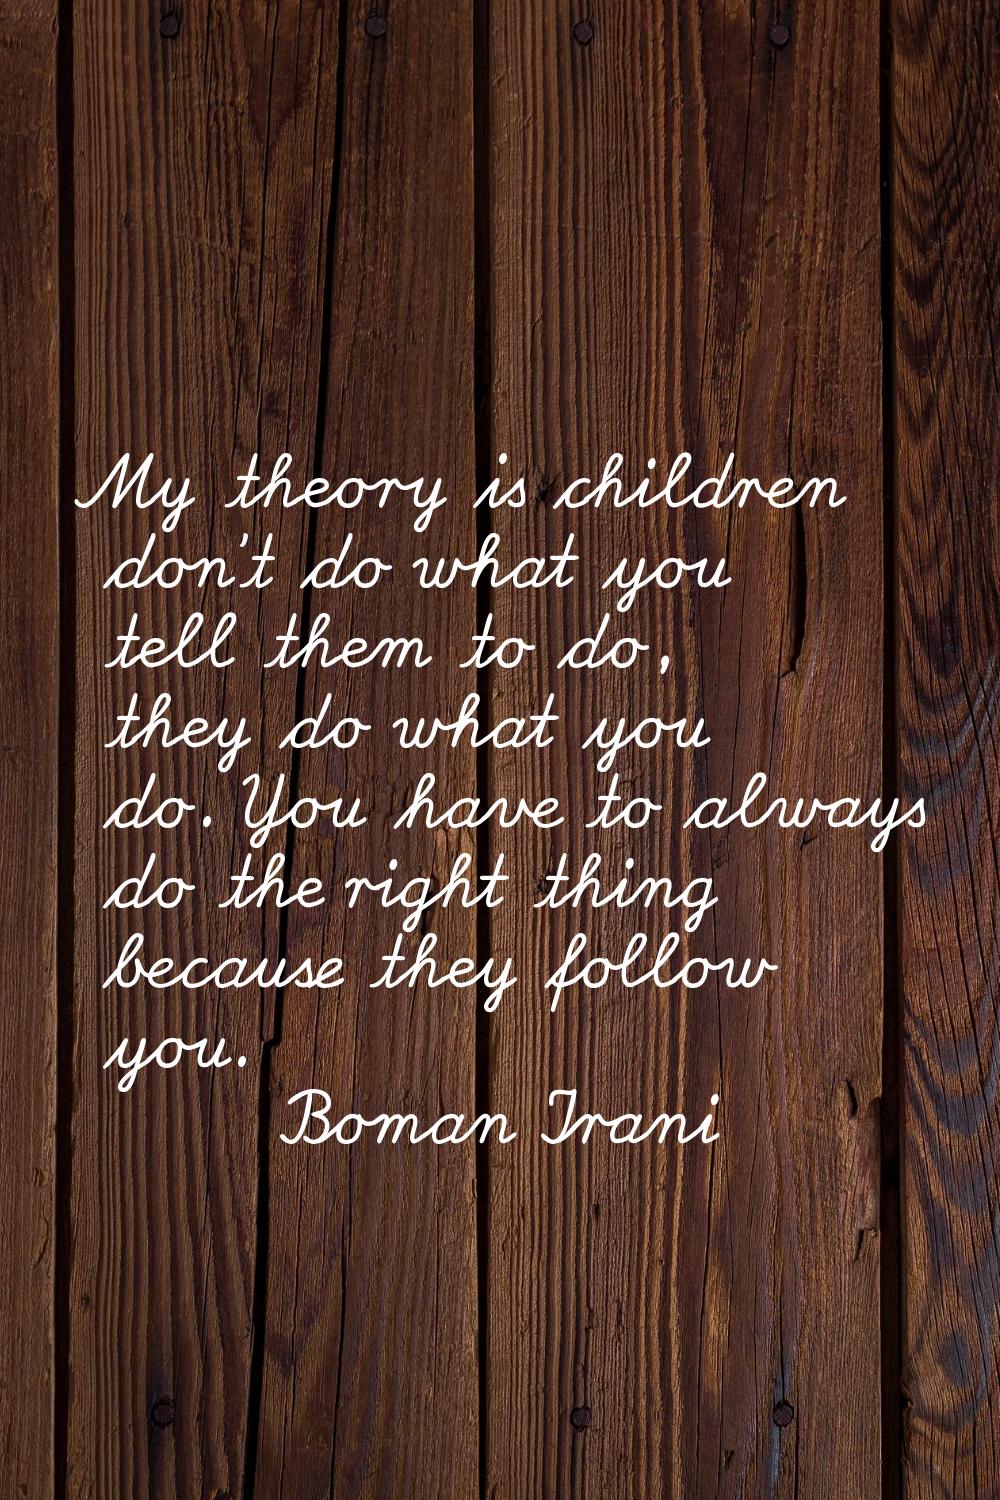 My theory is children don't do what you tell them to do, they do what you do. You have to always do